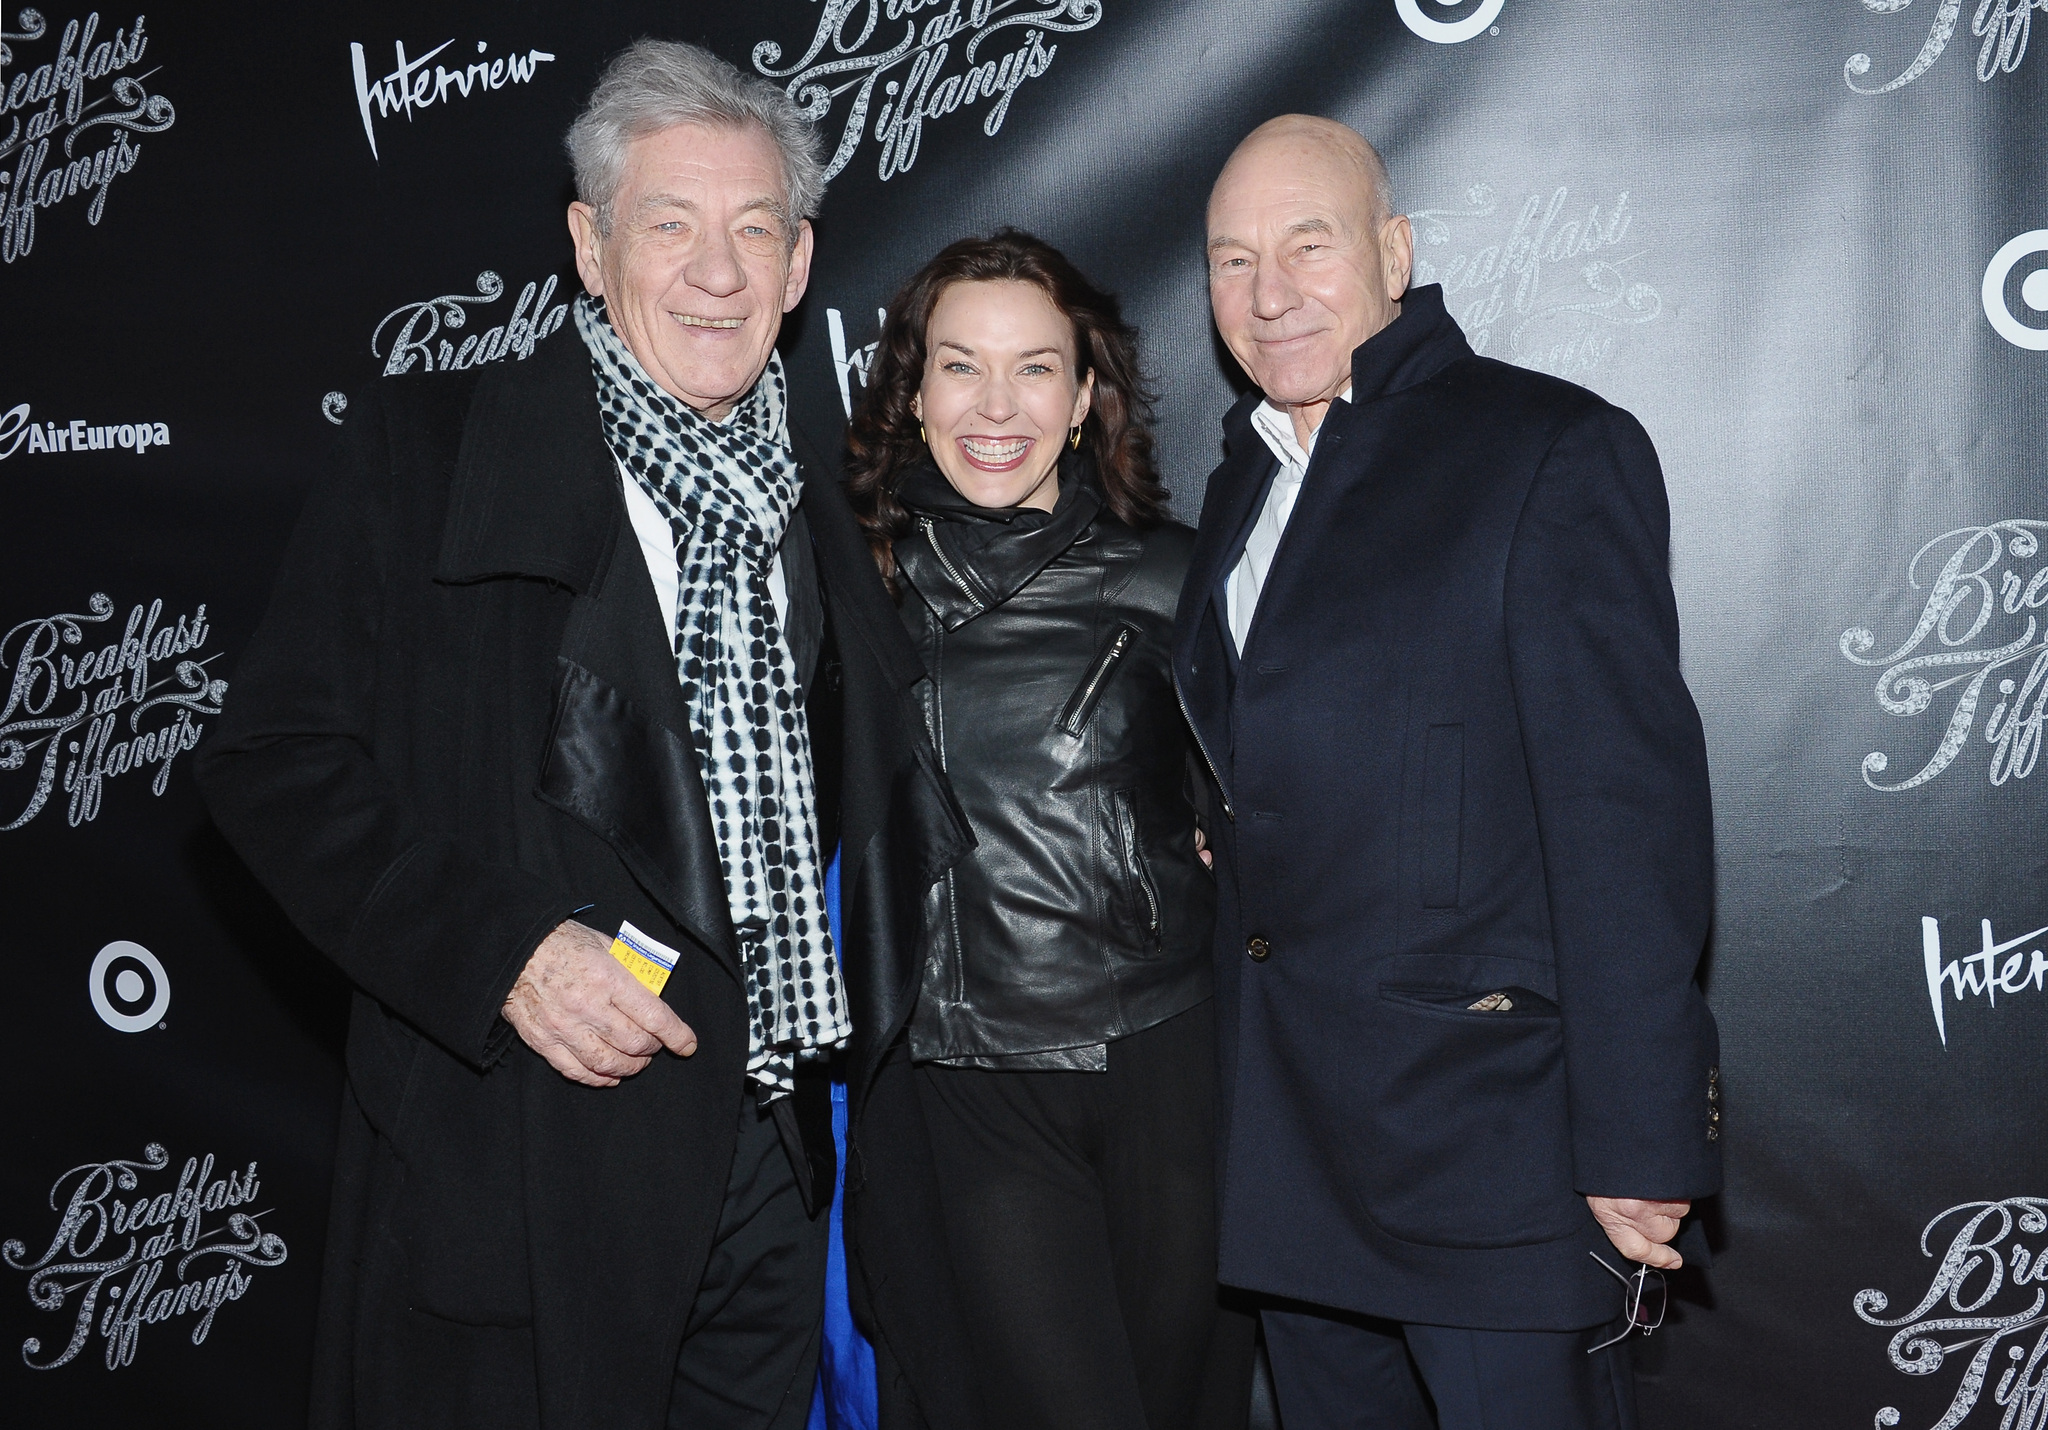 Actor Sir Ian McKellen, Sunny Ozell and actor Patrick Stewart attend the 